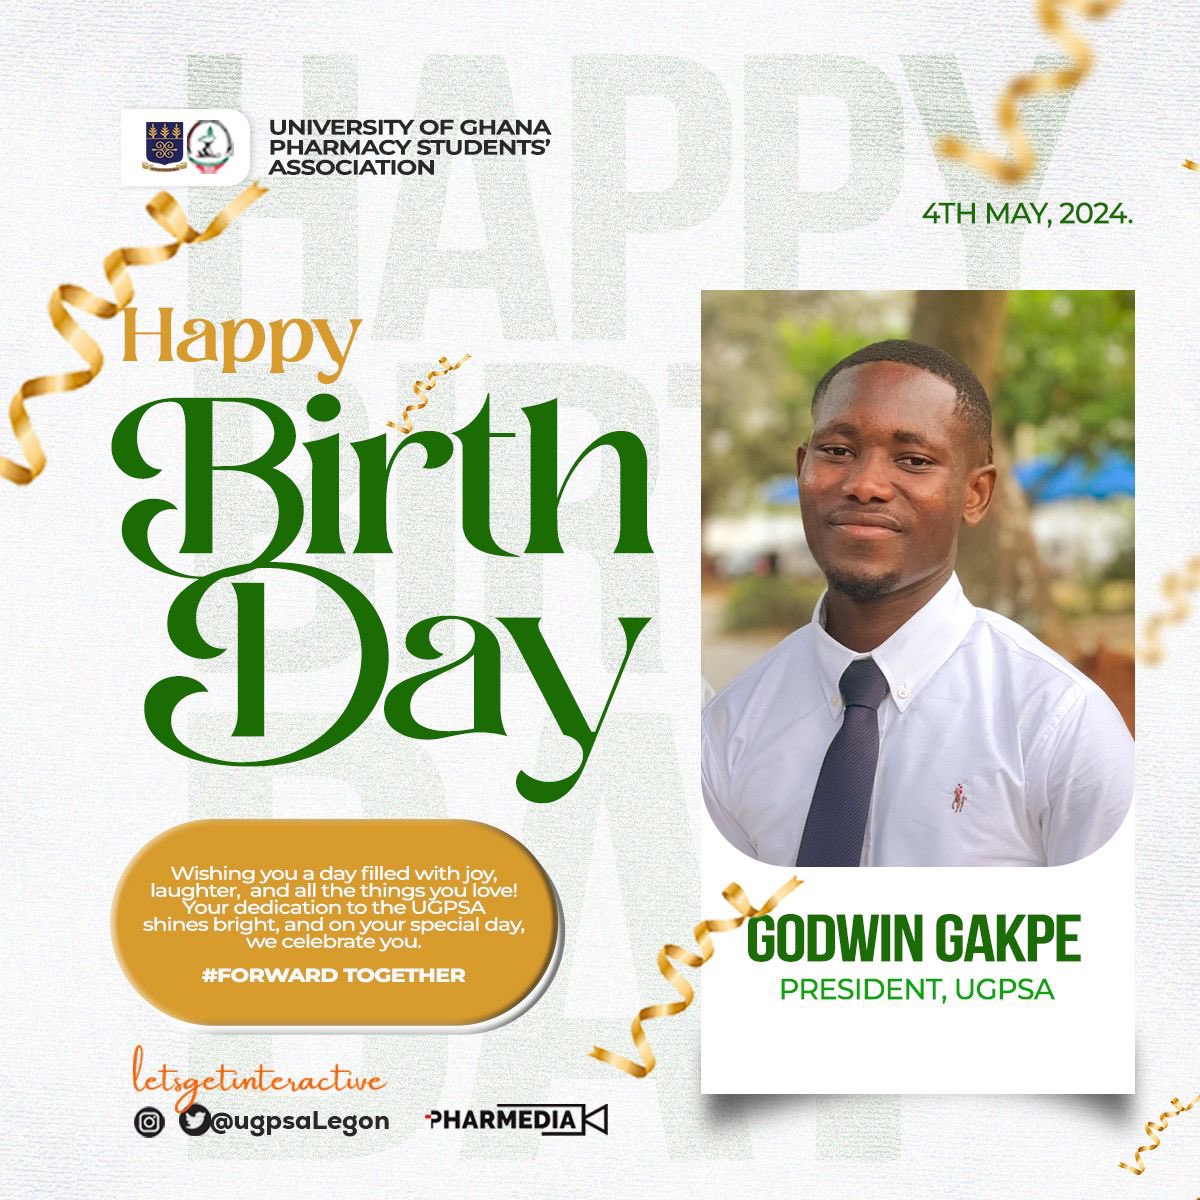 Happy Birthday to a leader who inspires us all, a beacon of knowledge and strength✨
May your birthday be filled with joy and your year filled with success🎉🎉
UGPSA appreciates you!
Happy Birthday, Mr. President, Godwin Gakpe Kudzo 🎉🎈
#FORWARDTOGETHER

POWERED BY PHARMEDIA📸